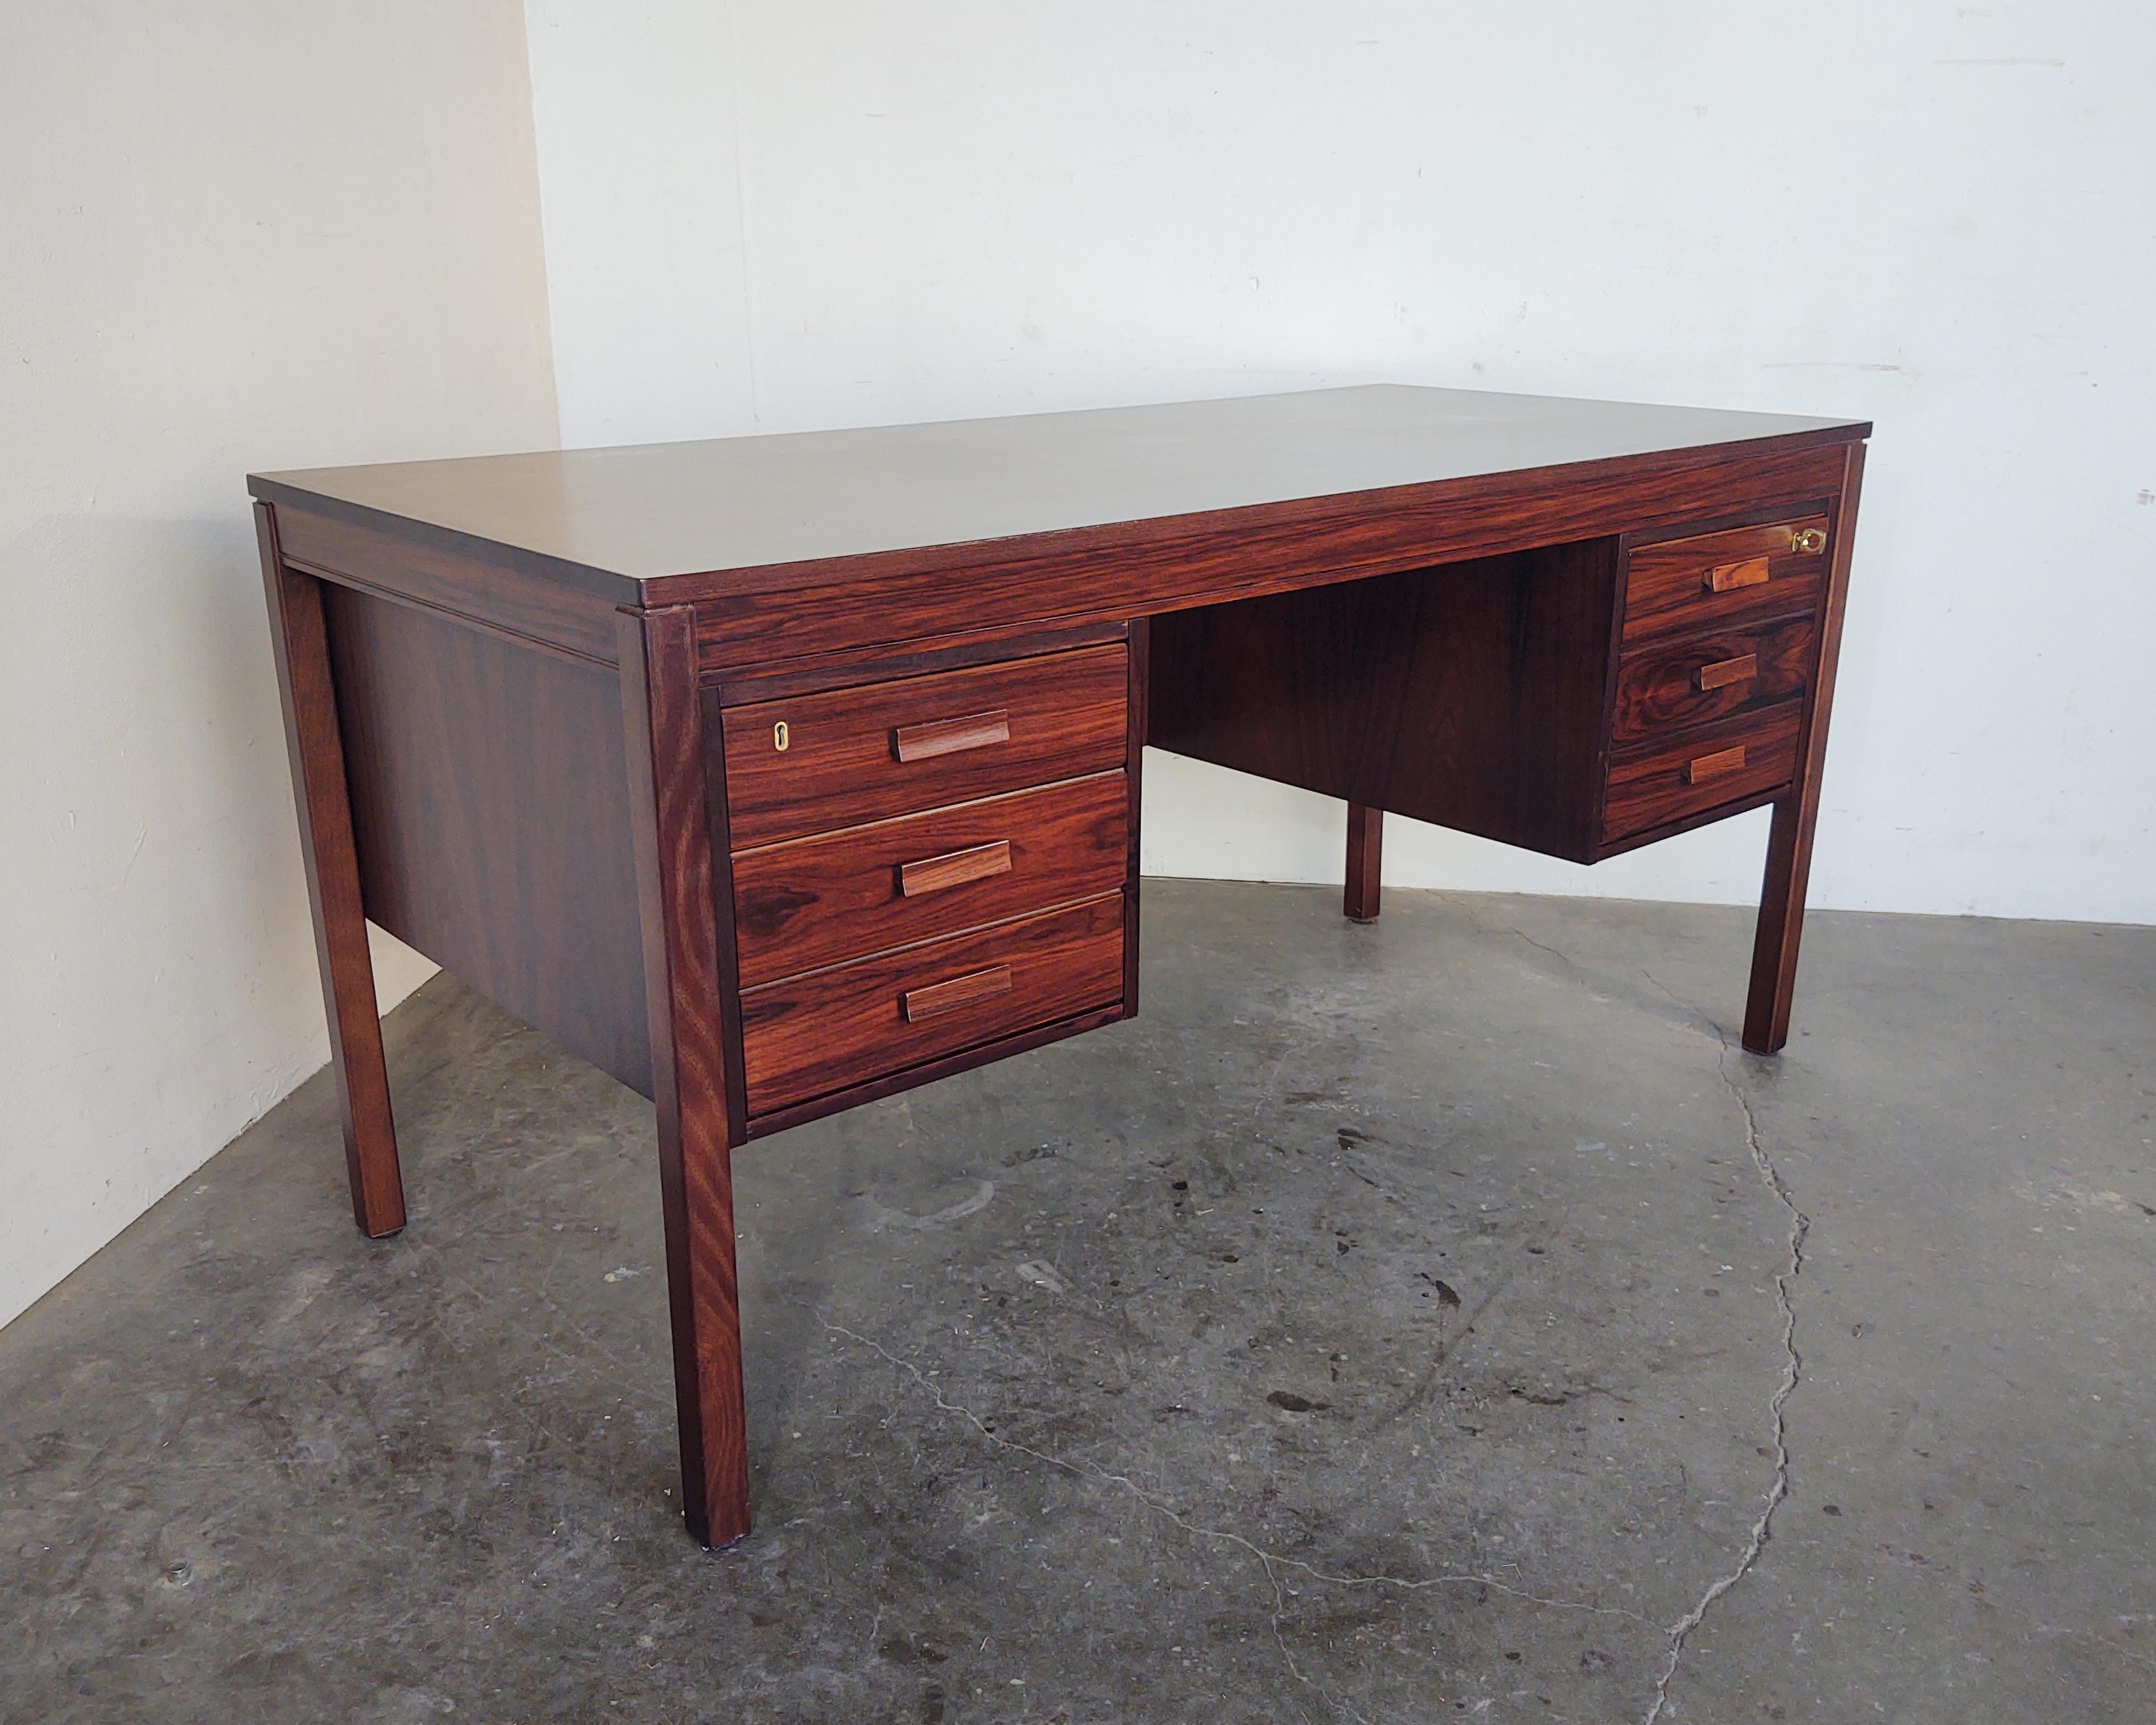 Rosewood desk by Heggen of Norway circa late 1960s. Beautiful wood grain with checkerboard marquetry top. Four drawers, including one large filing drawer on right side and original key included. Overall excellent vintage condition, some very light